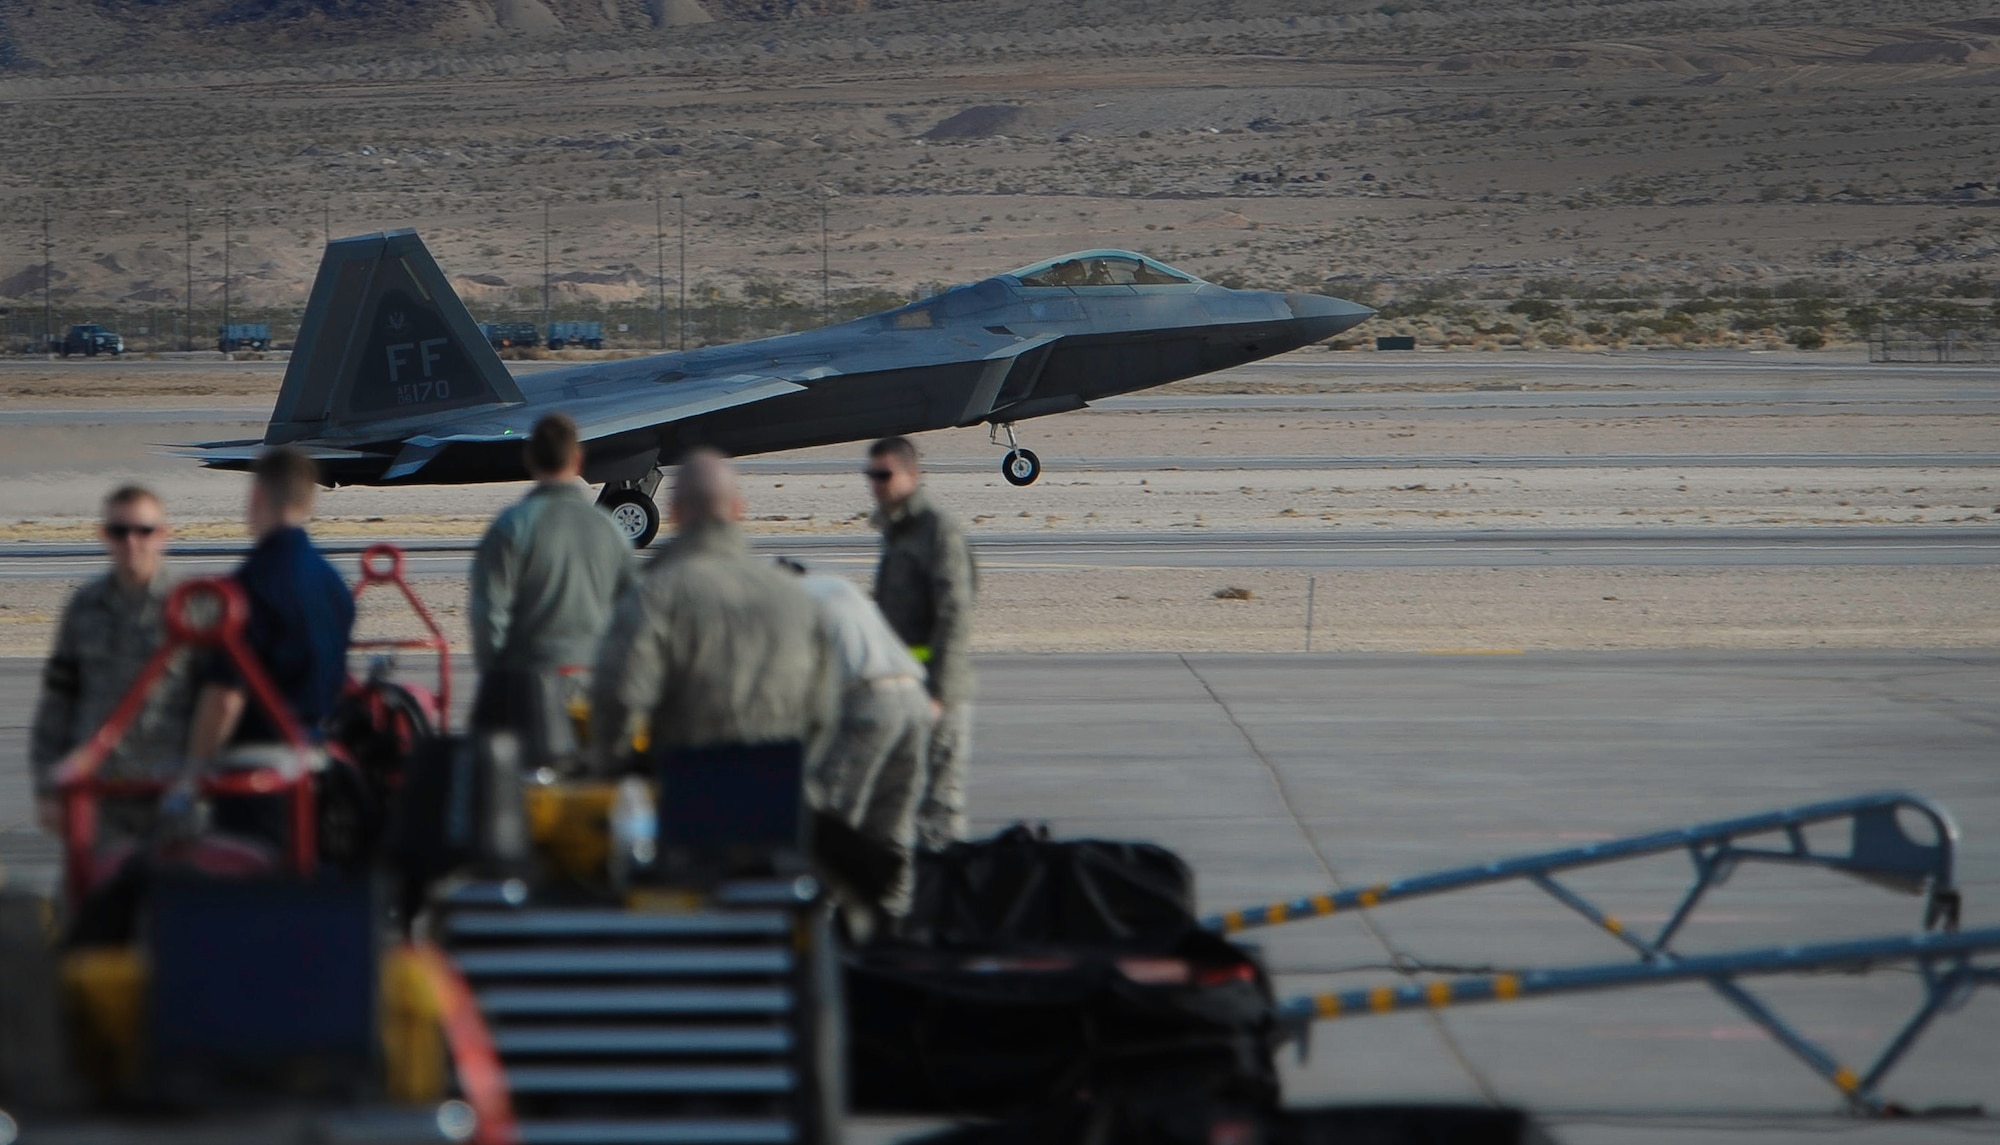 An F-22 Raptor assigned to the 1st Fighter Wing, Joint Base Langley-Eustis, Va., lands as maintainers wait for the fighter to taxi before Red Flag 17-1 on Nellis Air Force Base, Nev., Jan. 18, 2017. All four branches of the U.S. Military and air forces from allied nations participate in Red Flag. (U.S. Air Force photo by Airman 1st Class Kevin Tanenbaum/Released)